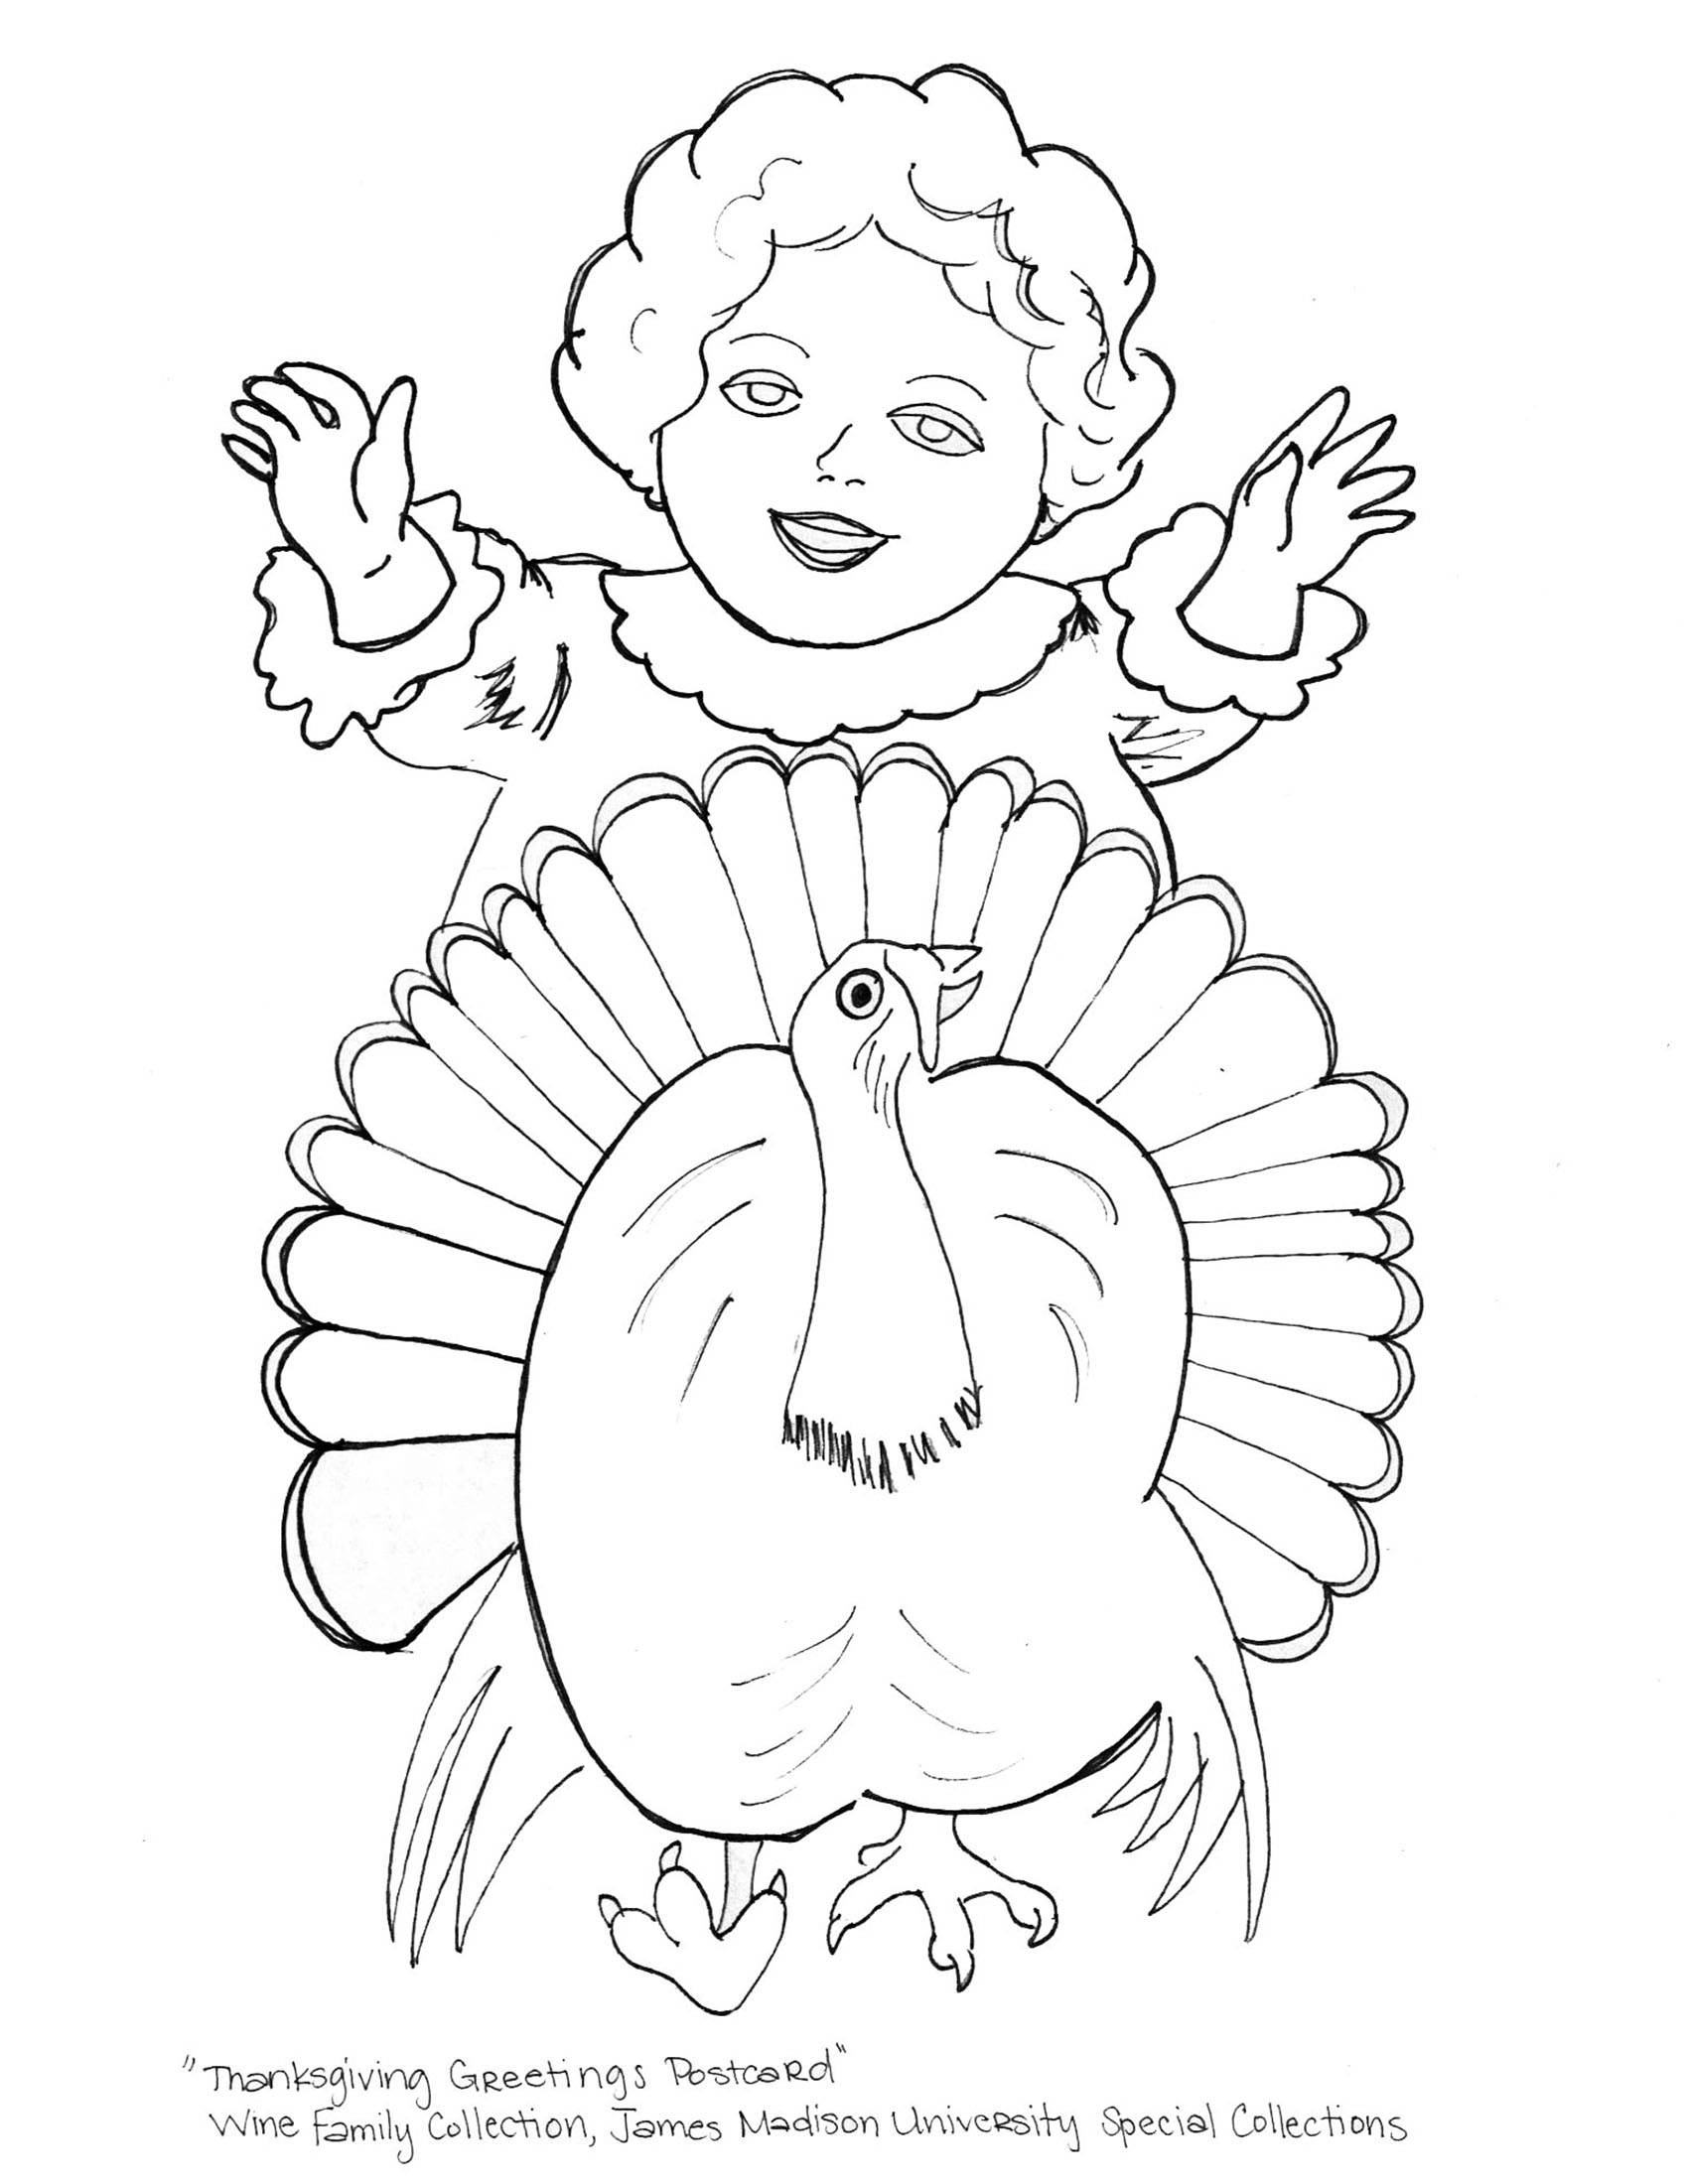 Image of Coloring Book Page 1